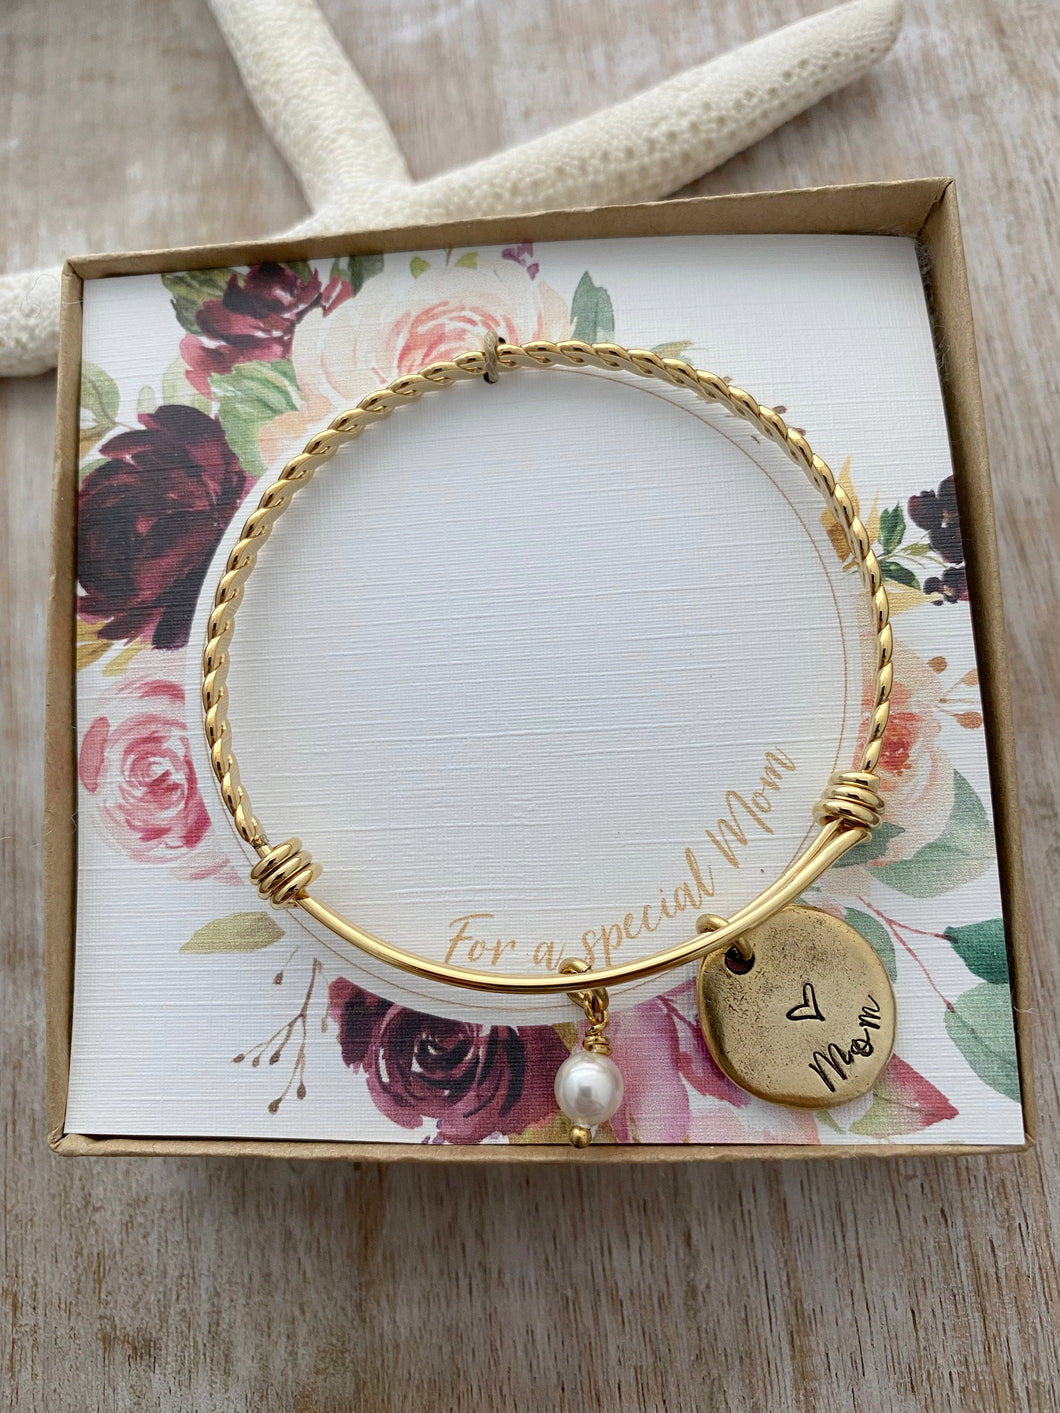 Gift for Mom, silver or gold plated  stainless steel bangle bracelet Mom disc and Pearl, Mother's Day  gift for mom with message card